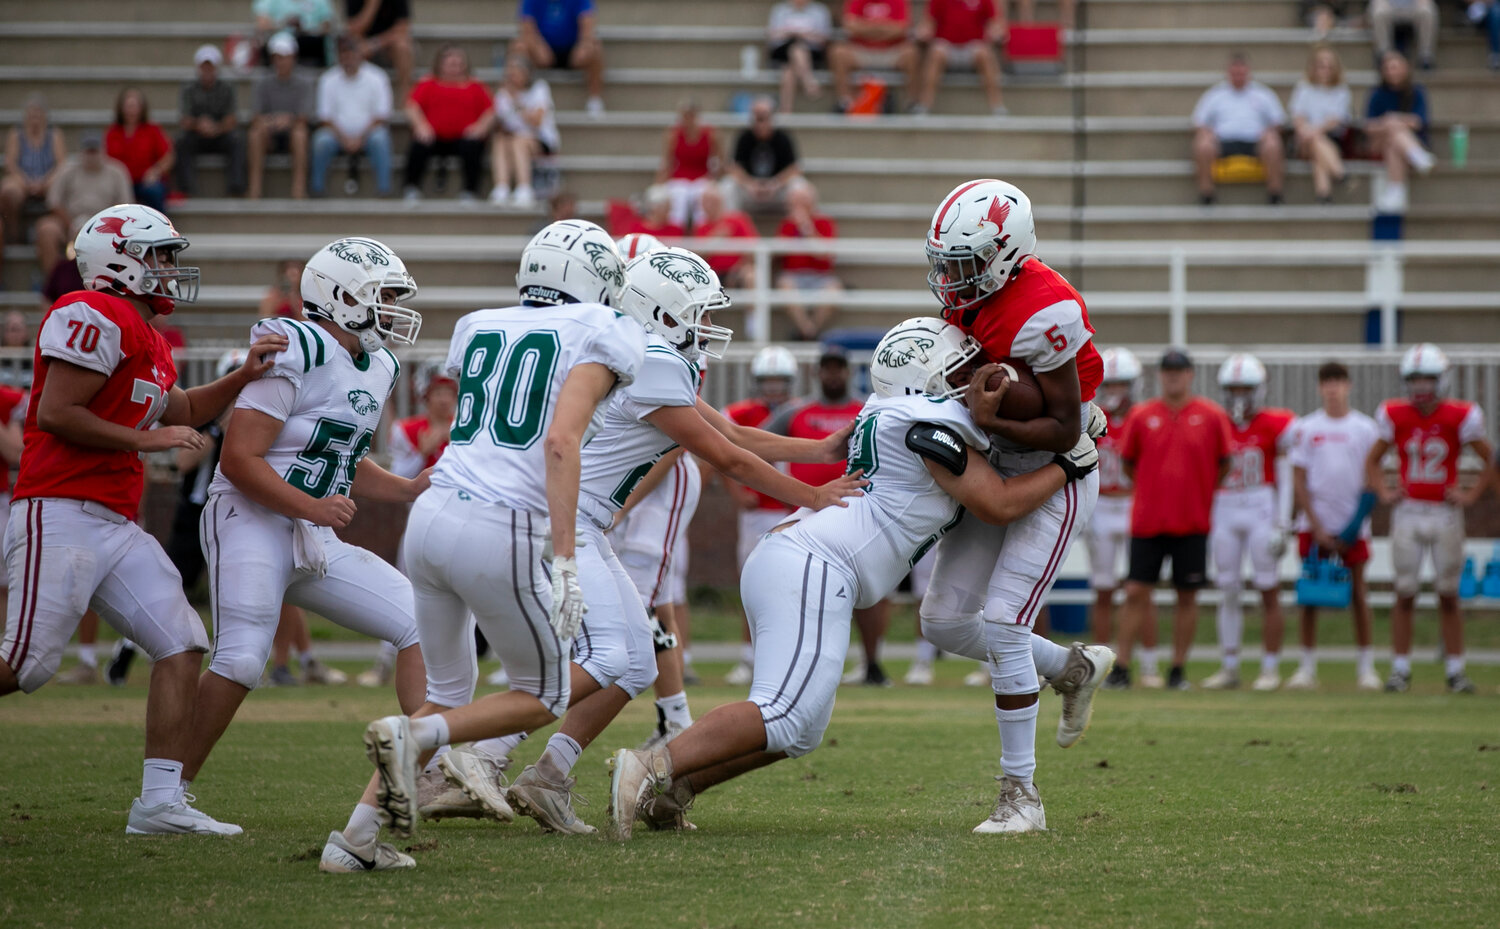 Senior Peyton Loftis (52) and the Bayshore Christian defense rally for a first-quarter stop during Monday’s JV game against the St. Michael Cardinals at Fairhope Municipal Stadium. St. Michael went on to earn a 24-0 win to drop the Eagles to 1-1 in their first season in program history.